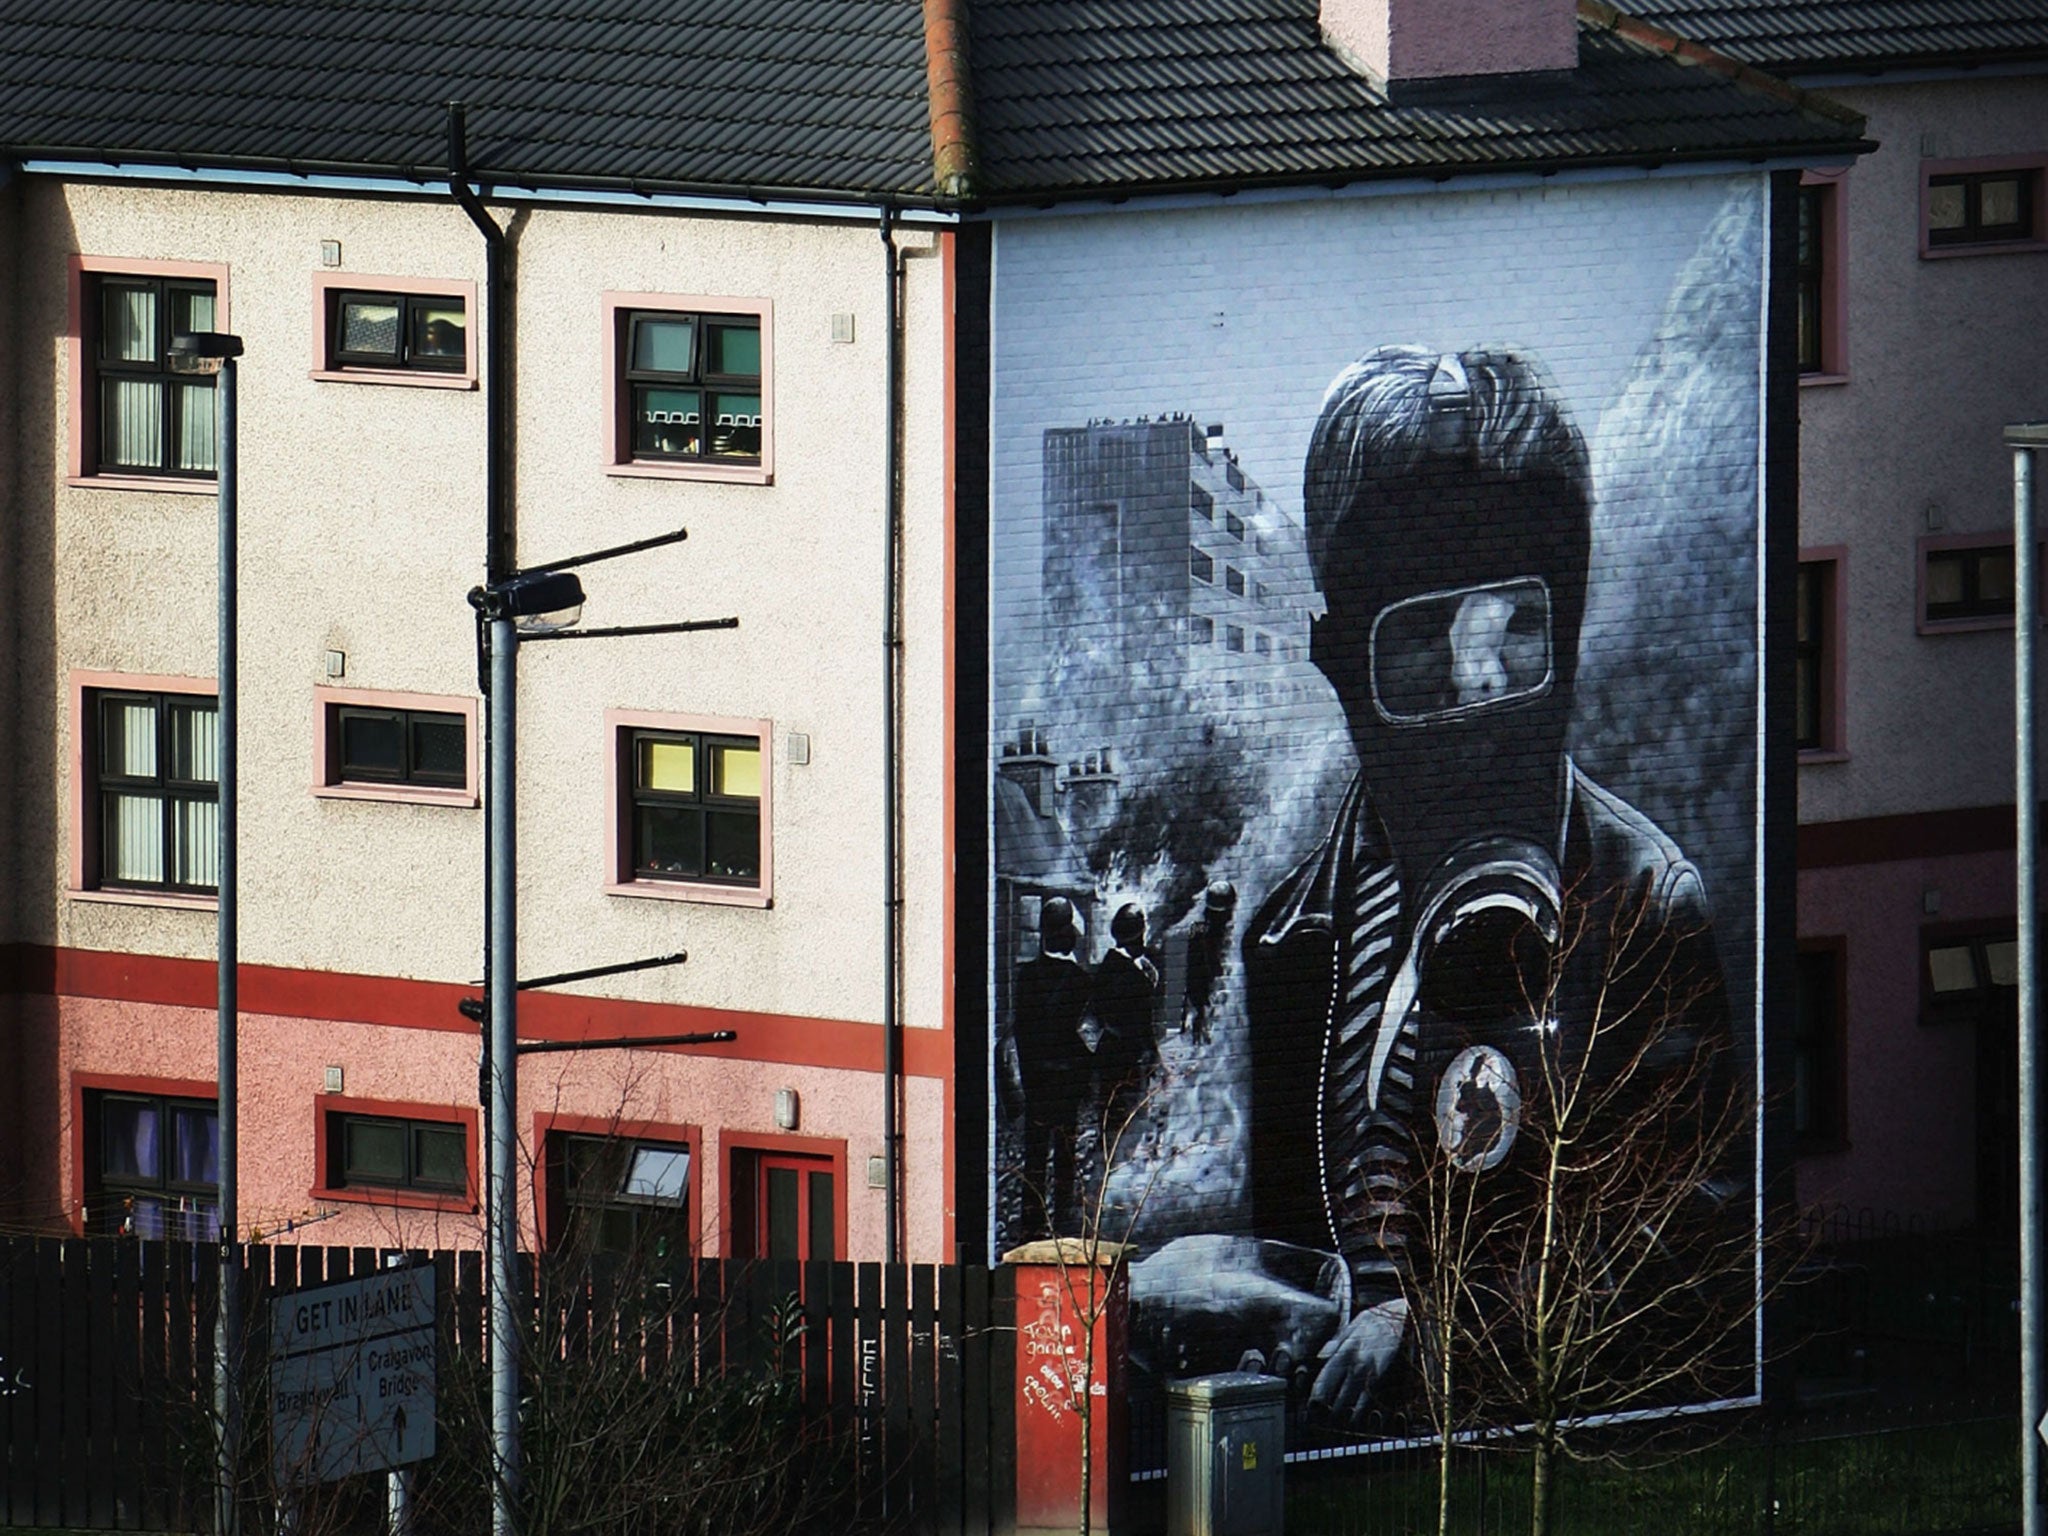 A Republican mural is seen on the side of a house in the Bogside area of Londonderry, the scene of the 'Bloody Sunday' shootings, Northern Ireland